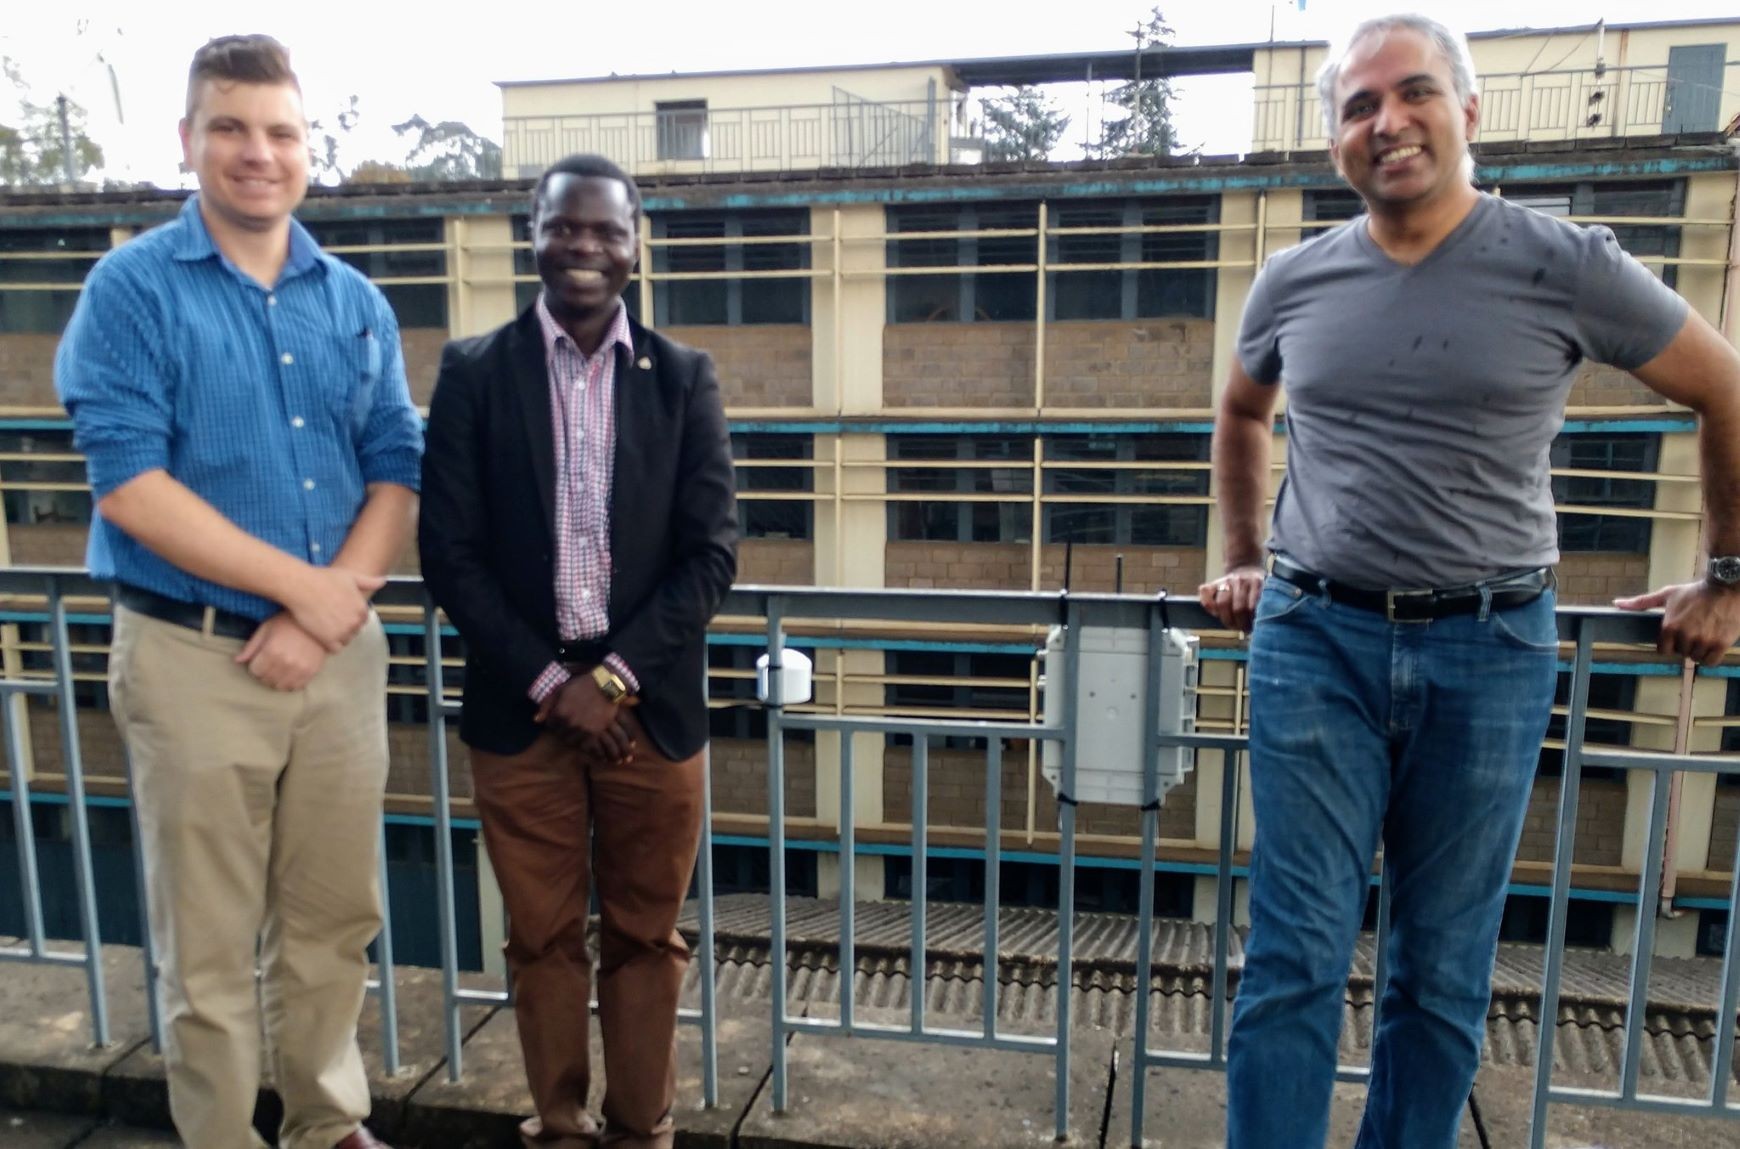 Prof. Westervelt and R. Subramanian of the Kigali Collaborative Research Center (KCRC) thereafter deployed a RAMP and a PurpleAir monitor at the University of Nairobi's Department of Chemistry, through the support of Prof. Vincent Madadi